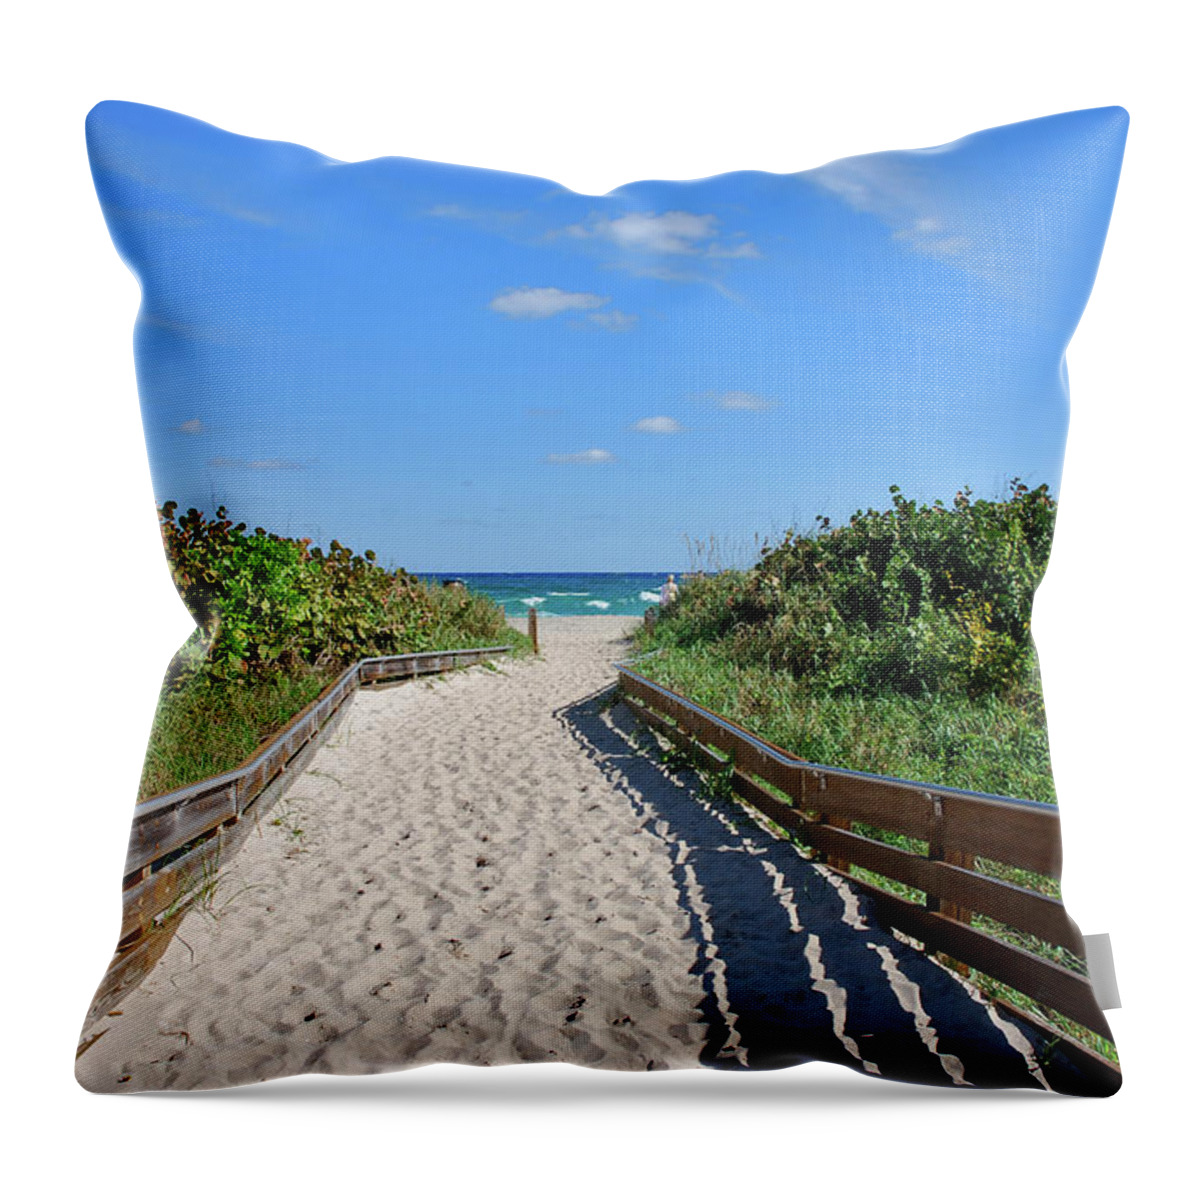  Throw Pillow featuring the photograph 4- The Beckoning by Joseph Keane